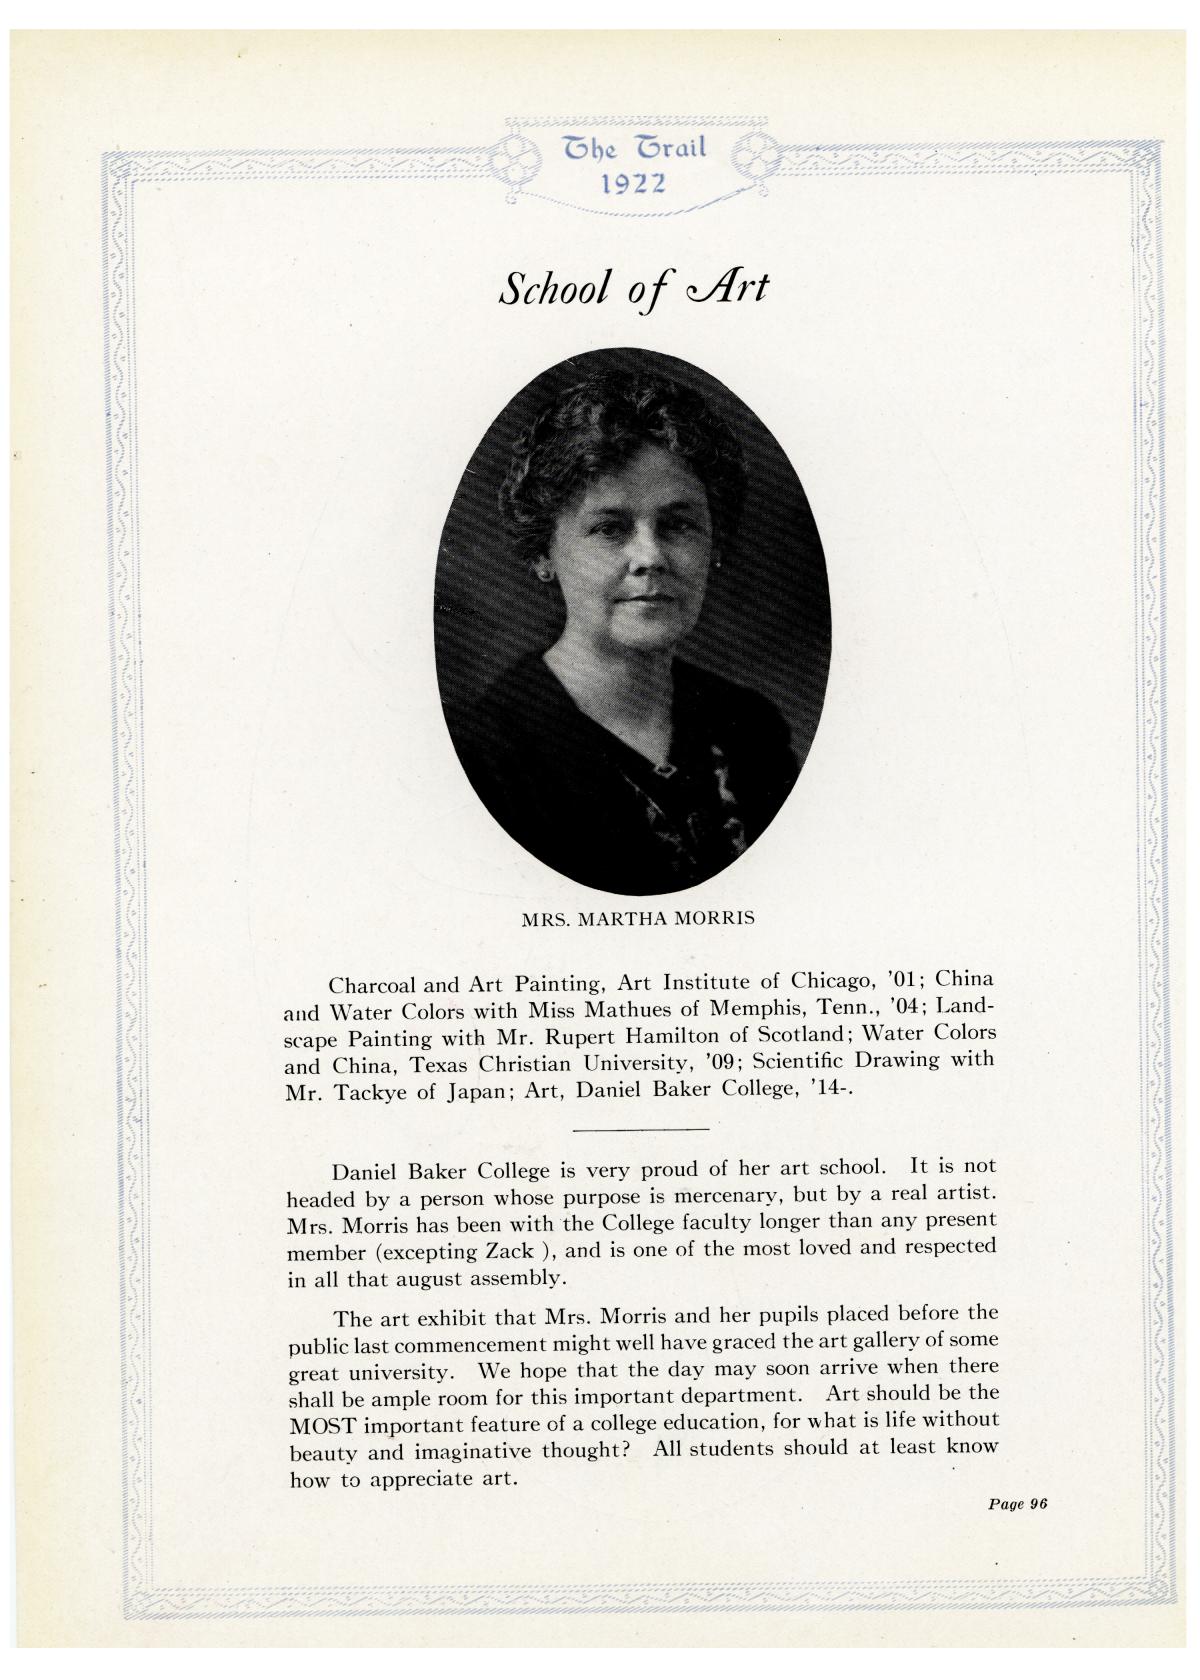 The Trail, Yearbook of Daniel Baker College, 1922
                                                
                                                    96
                                                